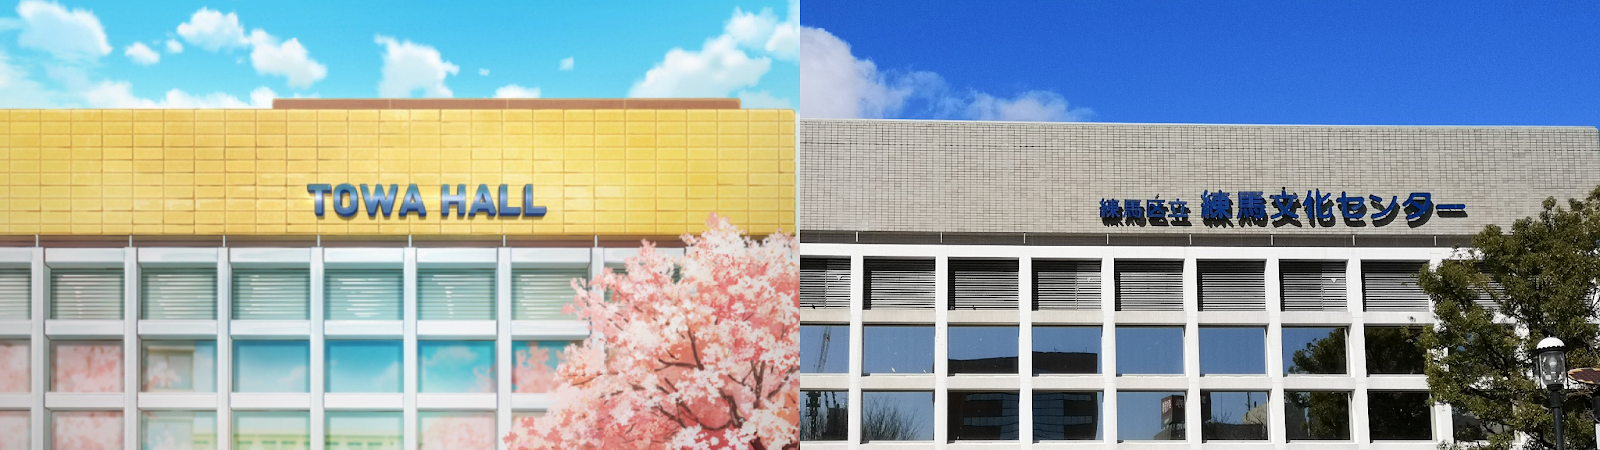 Your Lie in April' Real Life Anime Locations